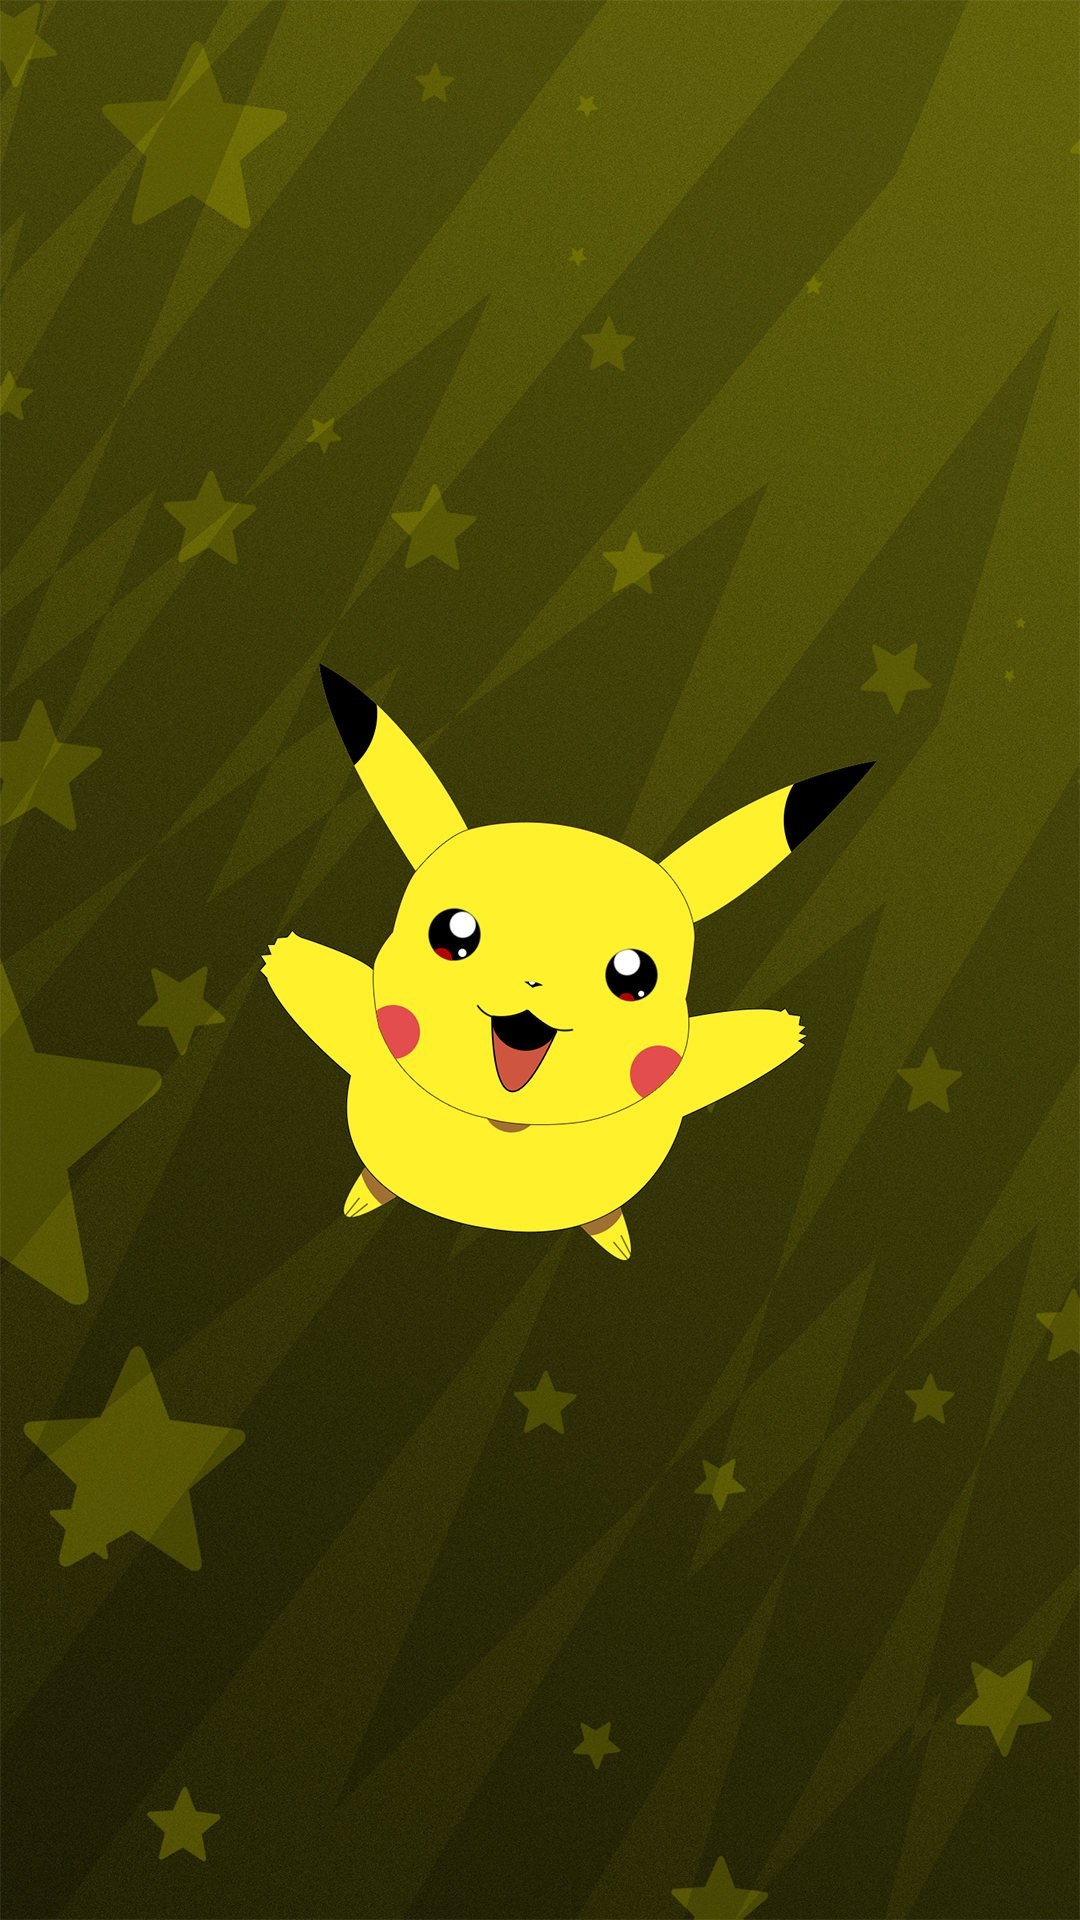 Pikachu Images Hd Wallpapers For 5s - HD Wallpaper 